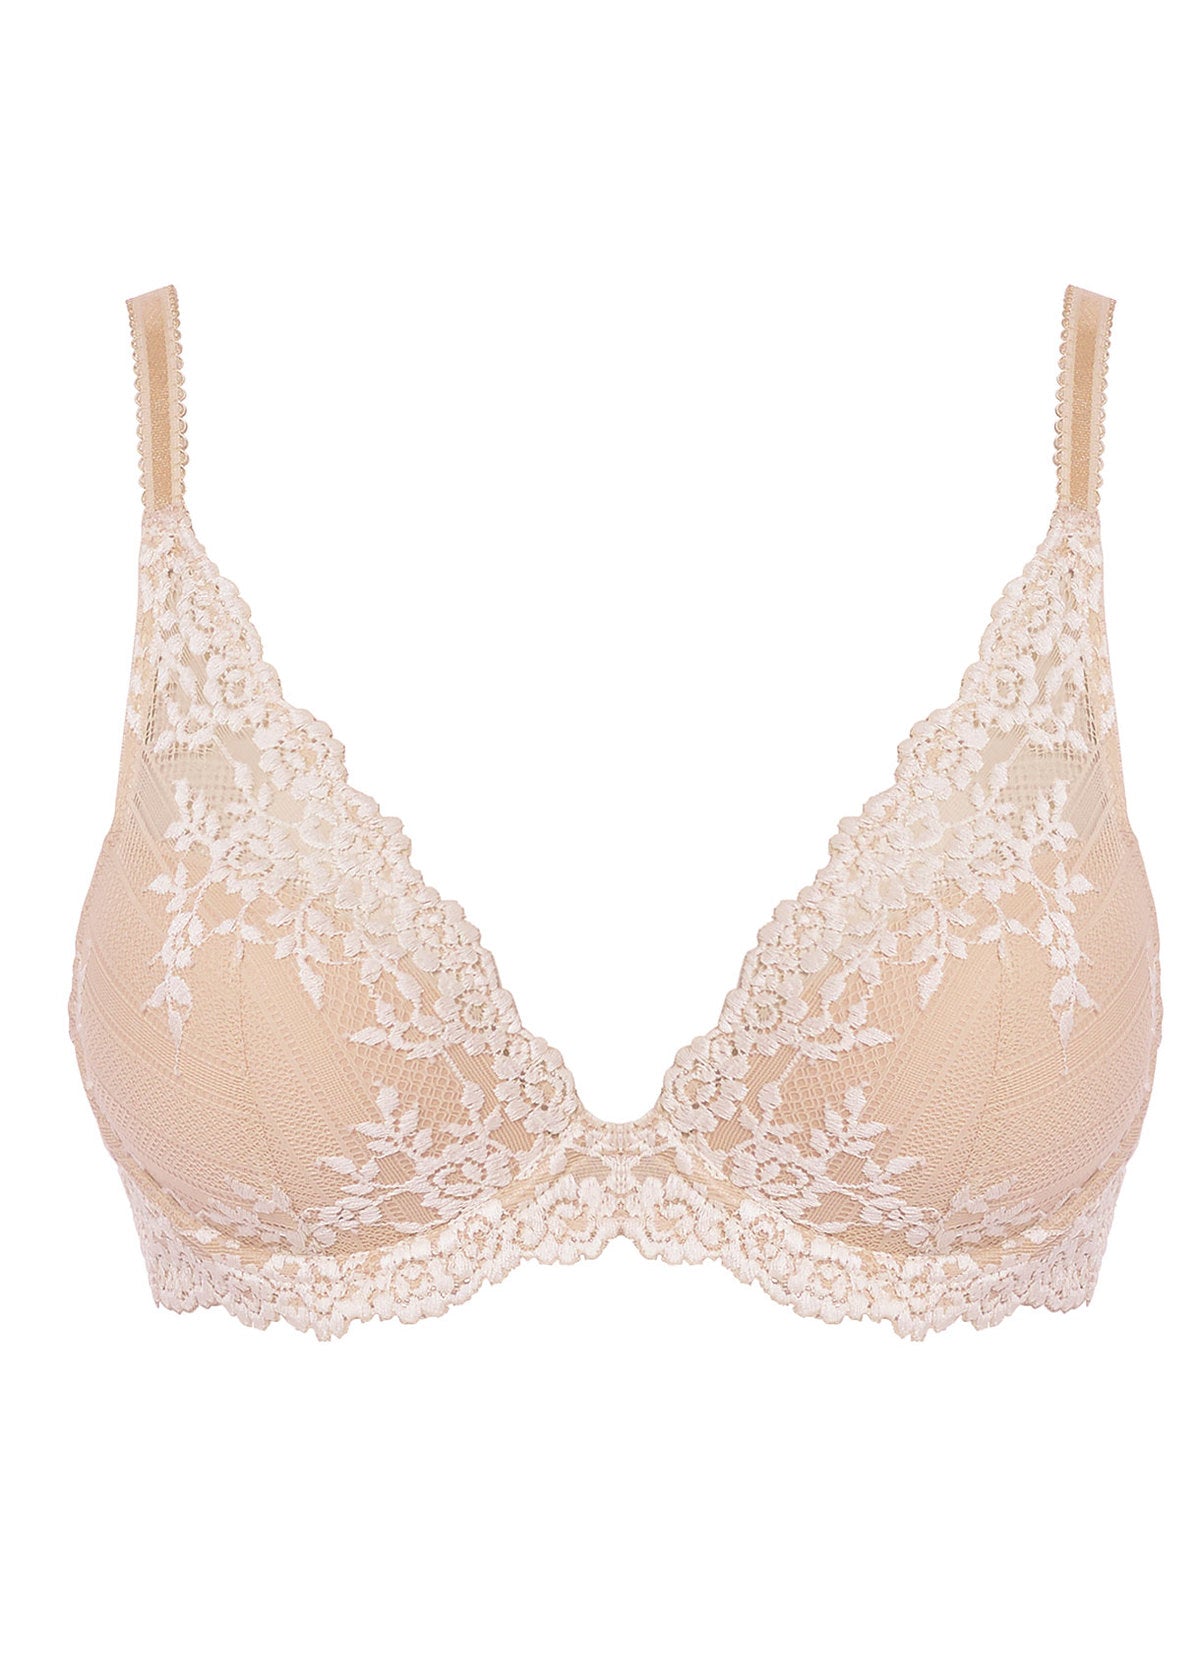 Lace Perfection Botanical Green Plunge Bra from Wacoal